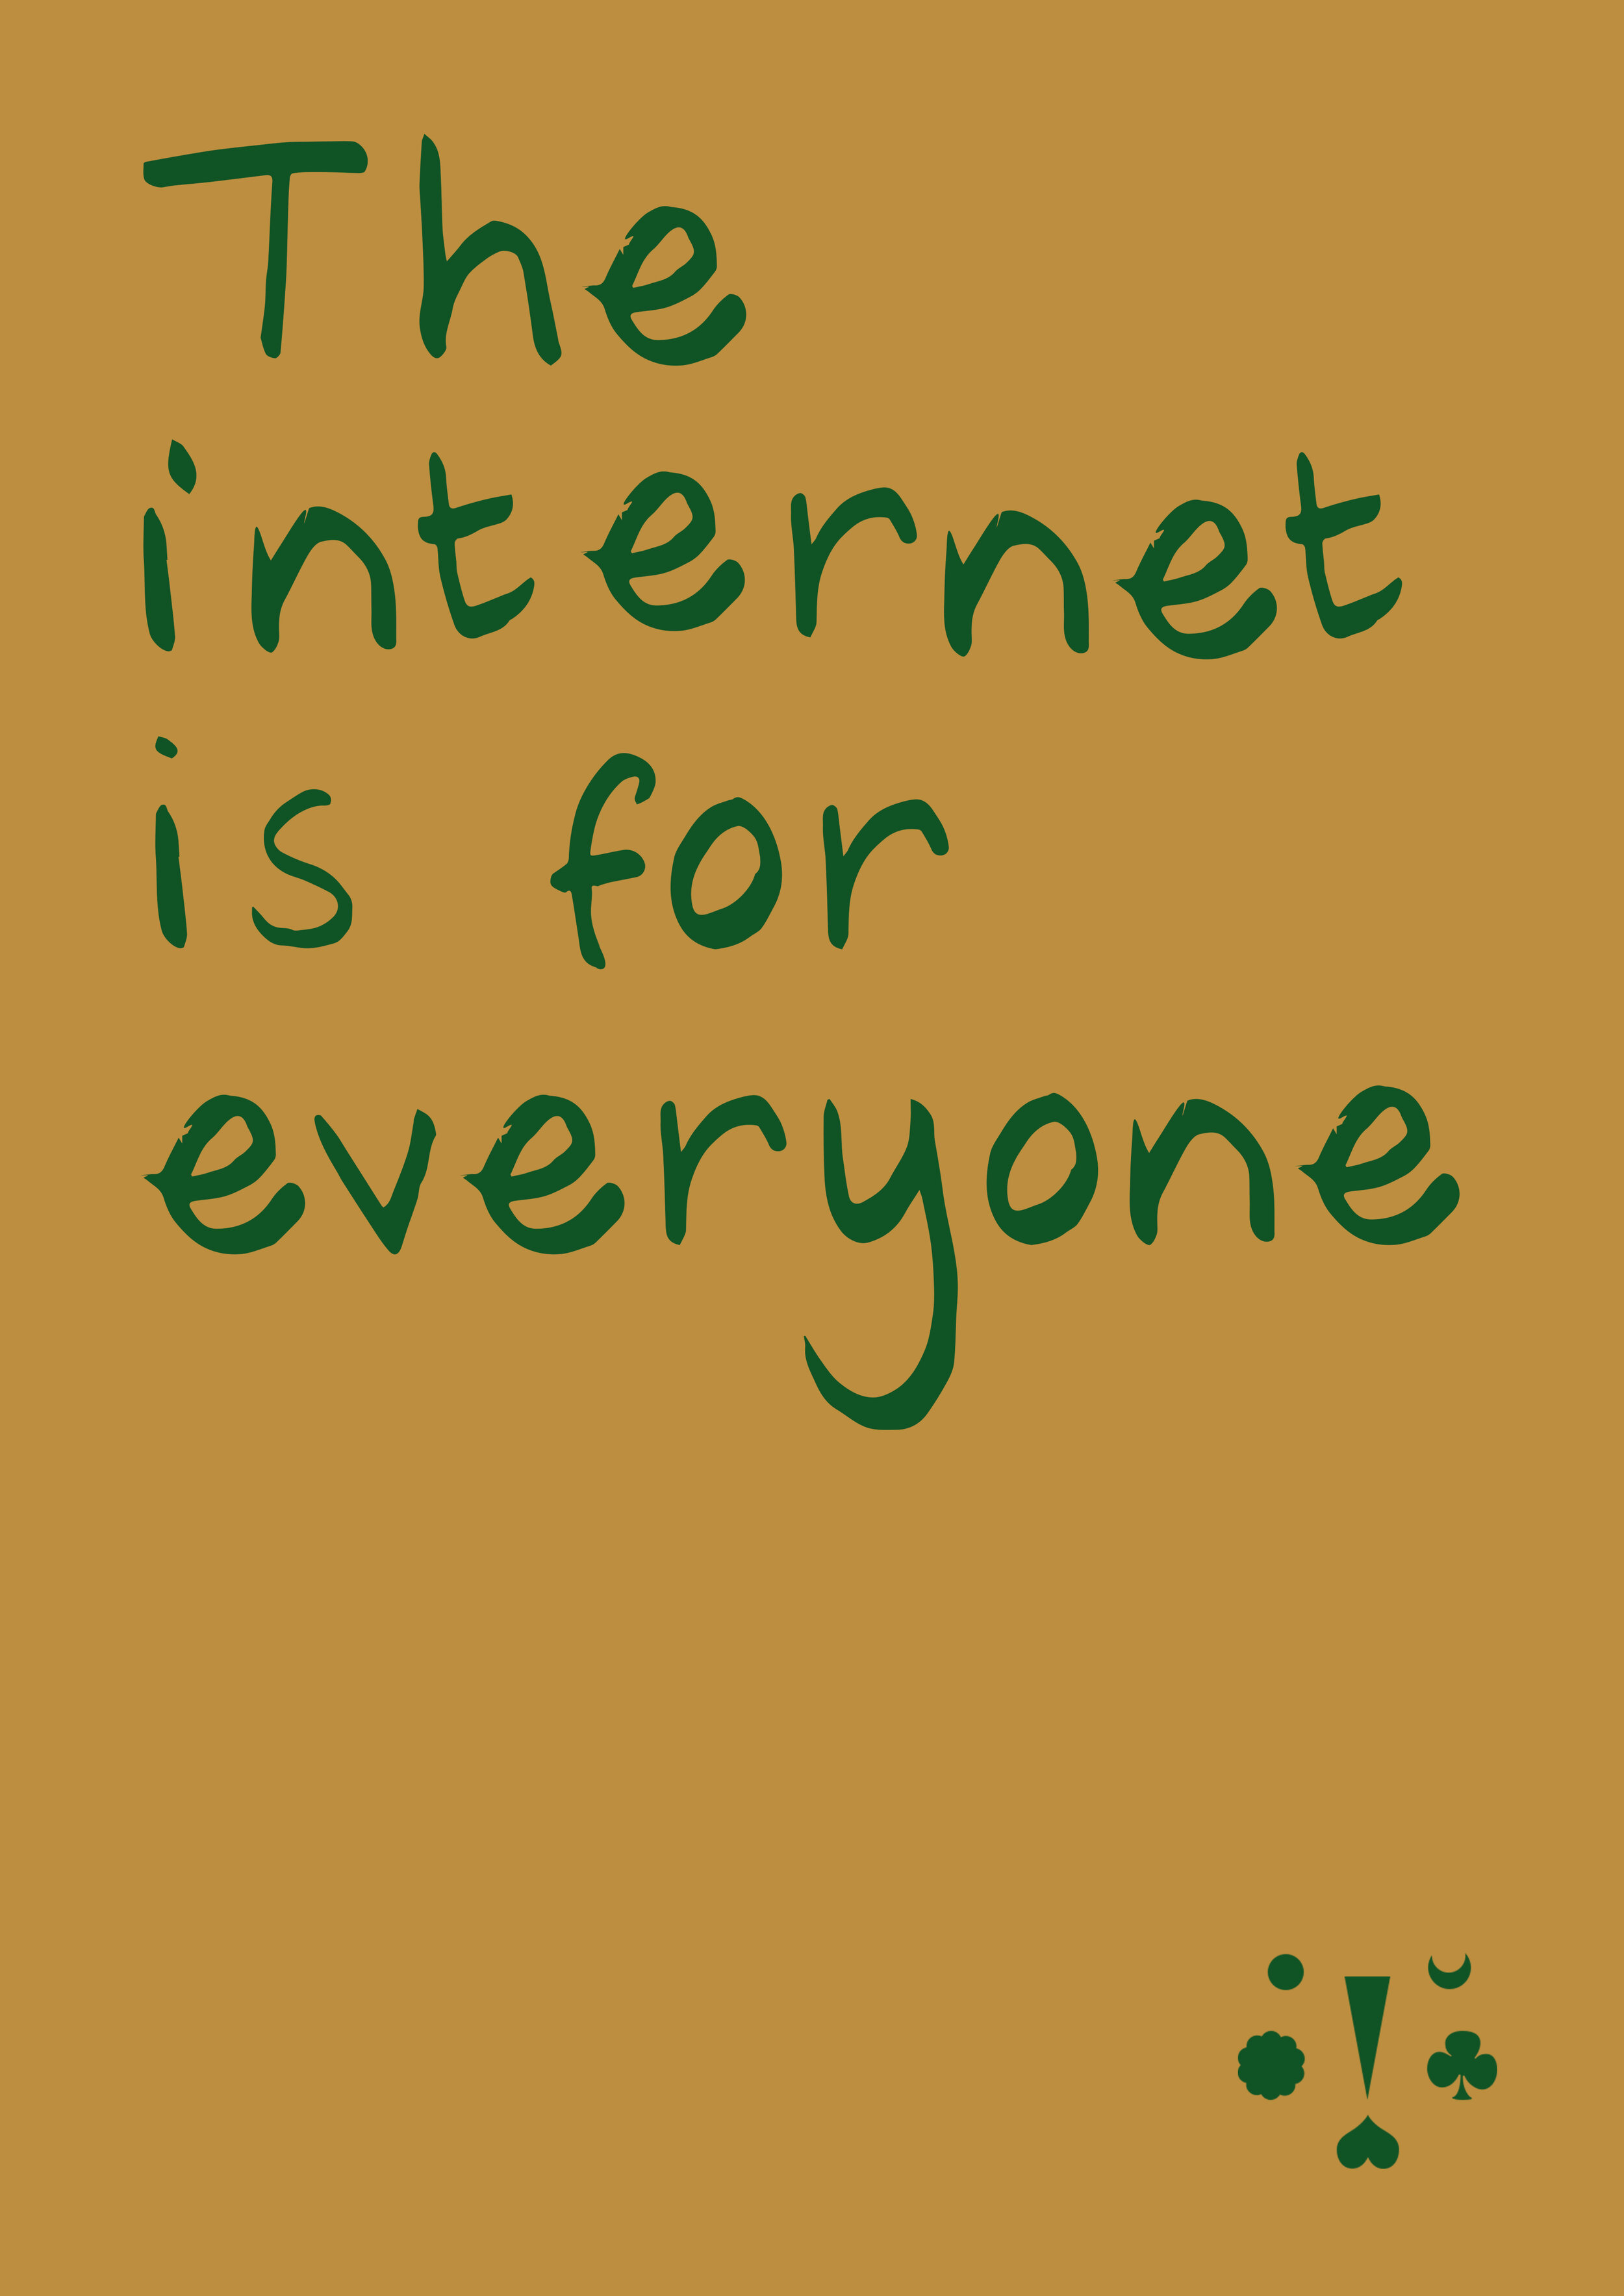 The internet is for everyone